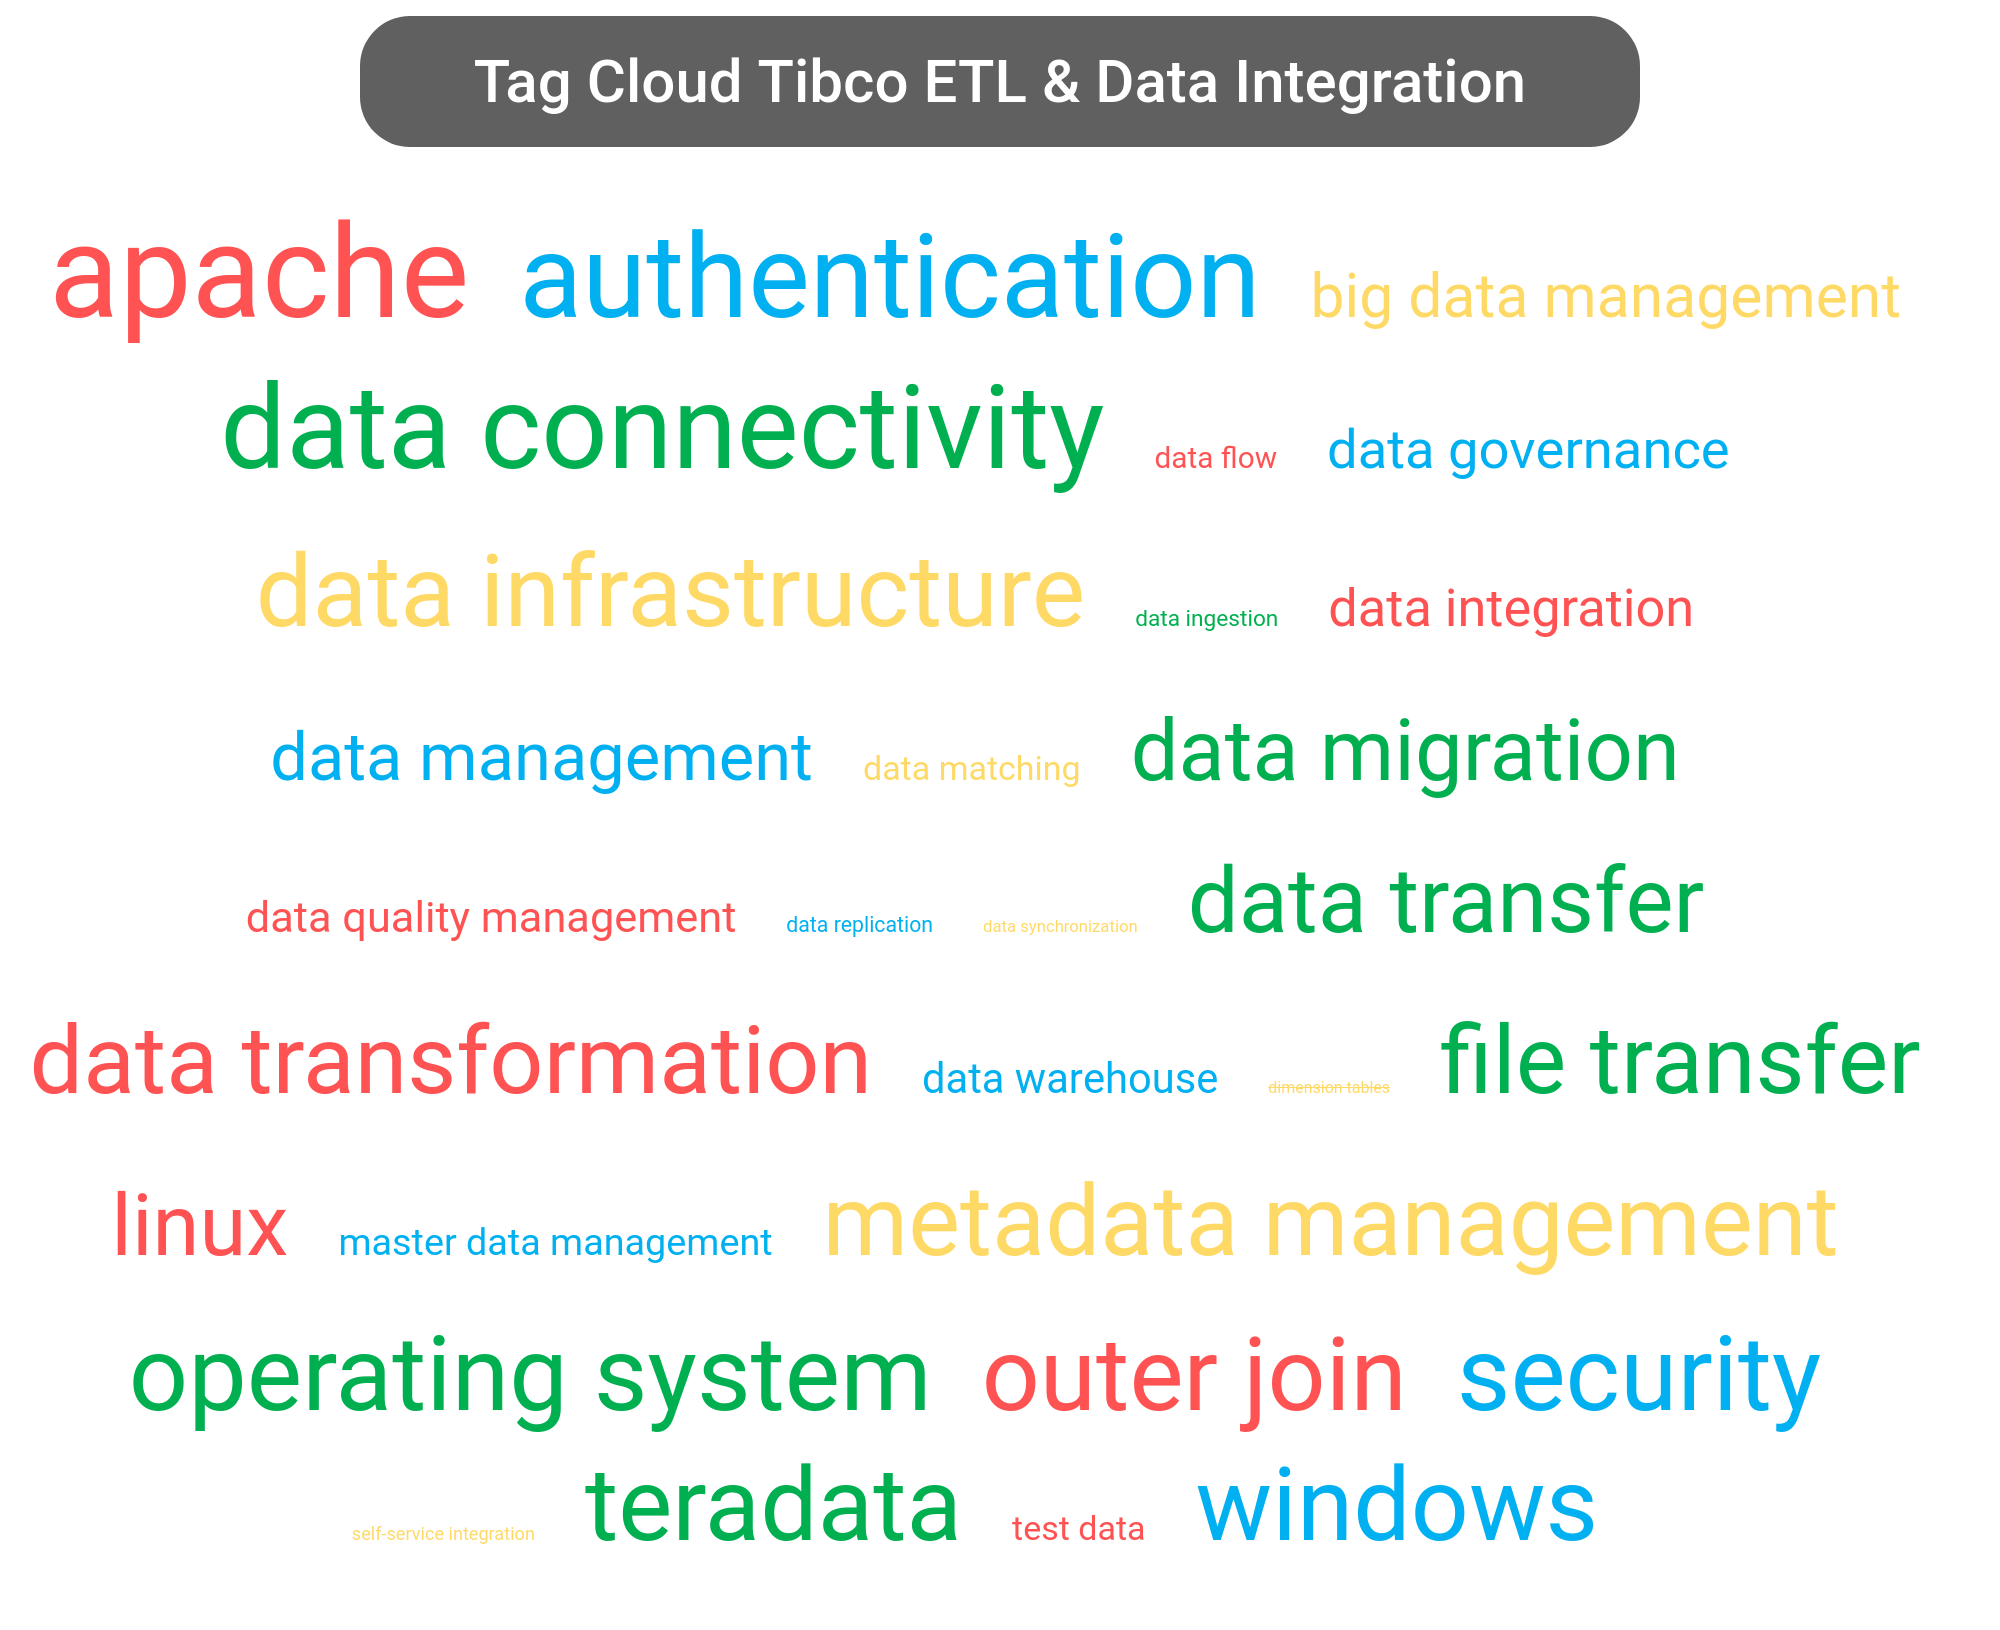 Tag cloud of the Tibco Data Management software.